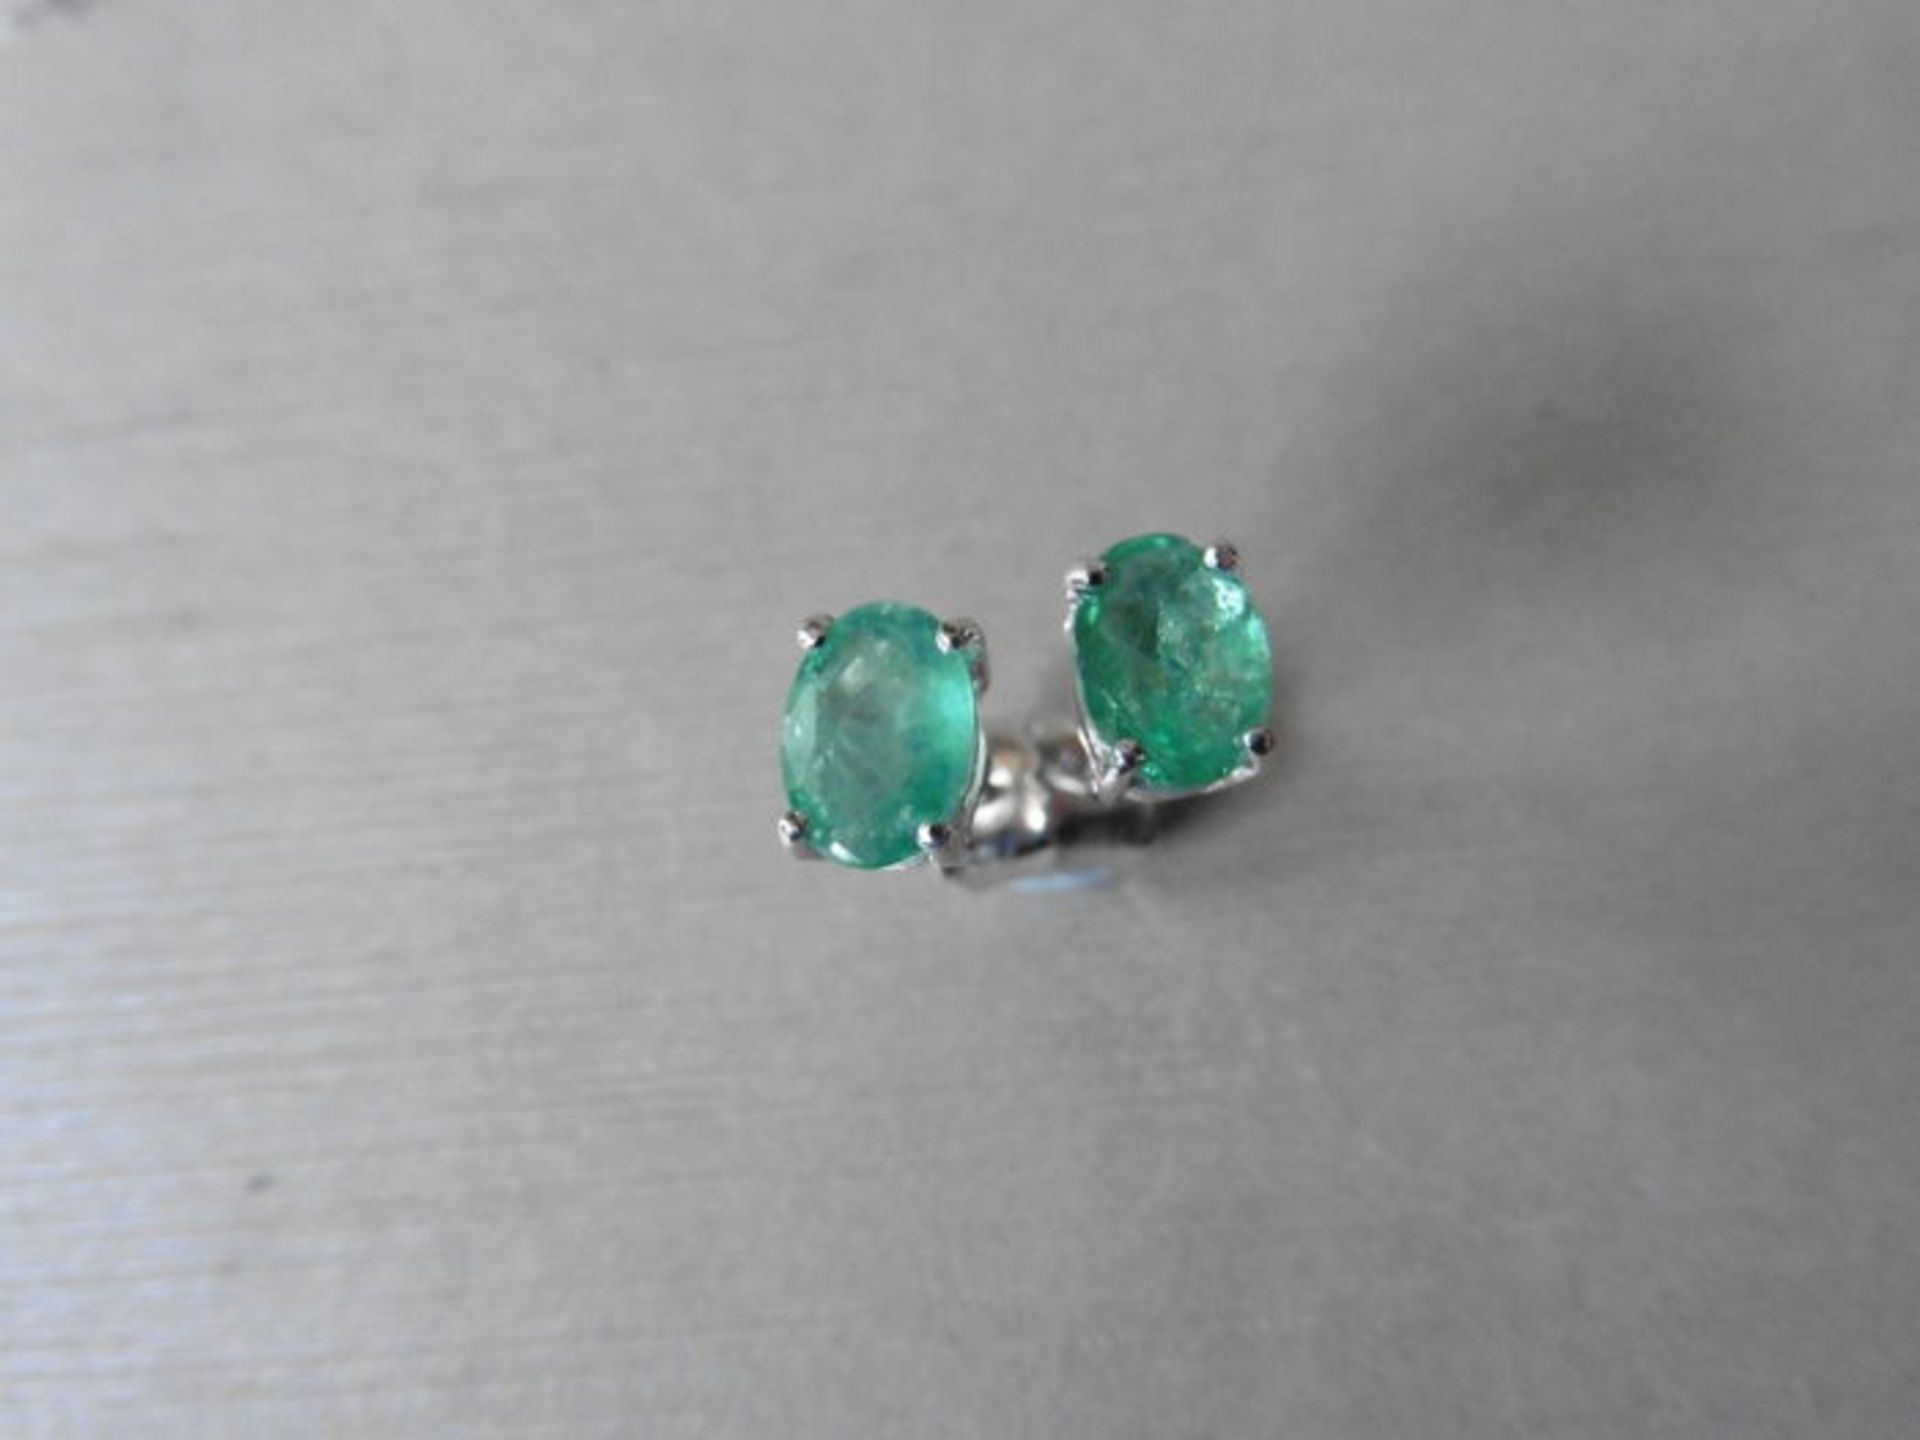 0.60ct emerald stud style earrings set in 9ct white gold. 7 x 5mm oval cut emeralds ( treated) set